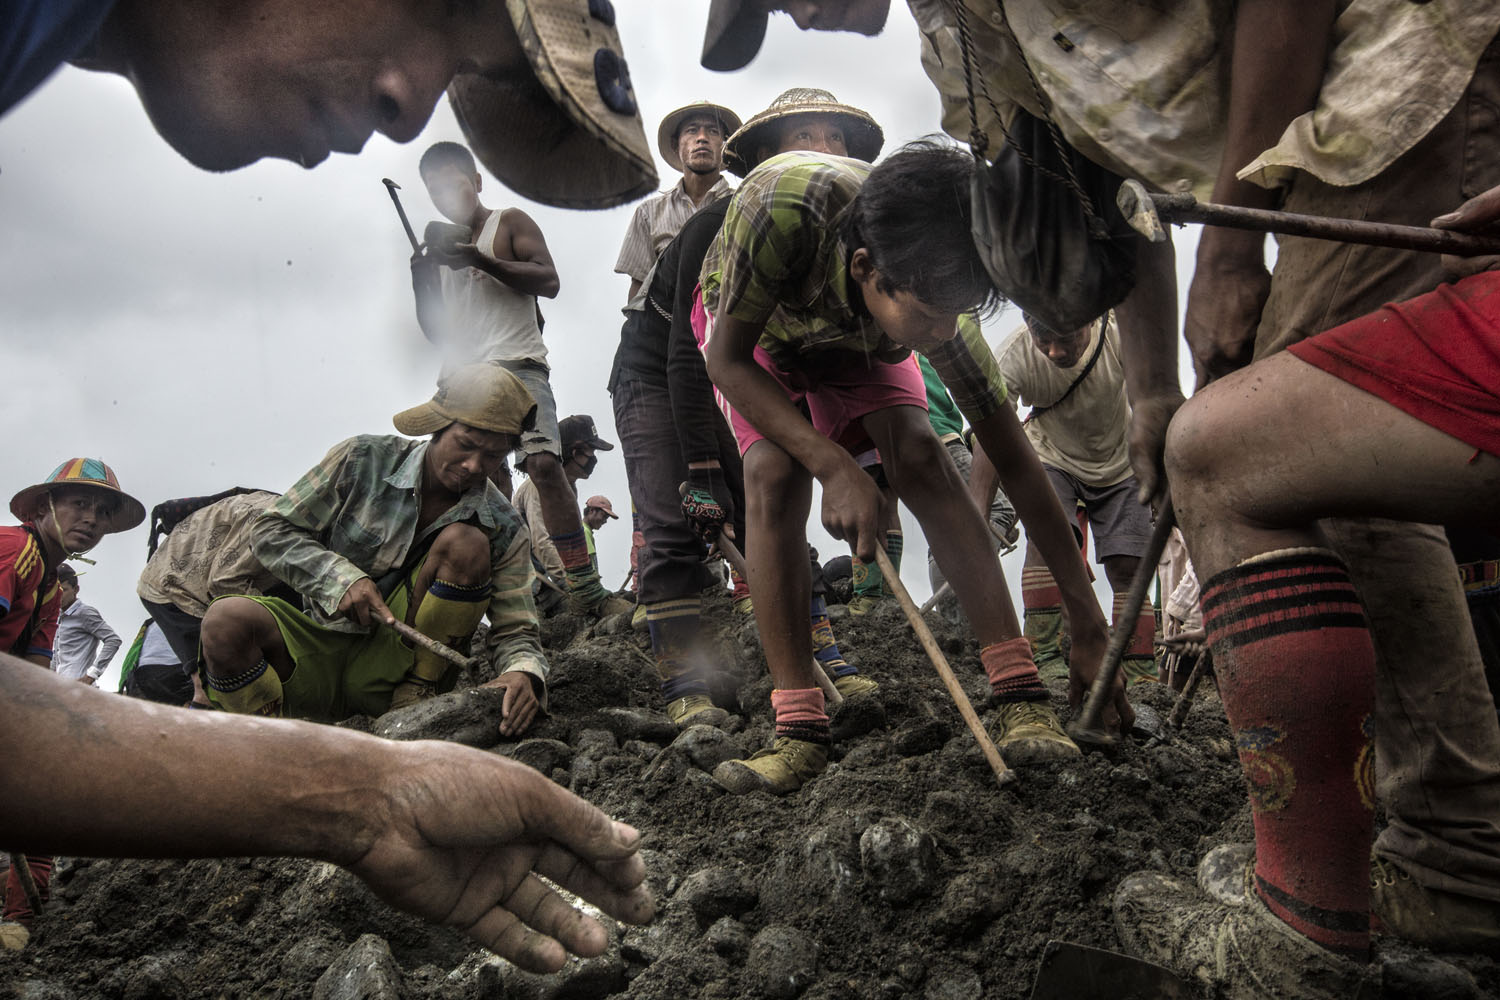 Freelance miners search for jade on a pile of earth-waste which is dumped by a mining company, Hpakant, Kachin State, Burma, June 2015